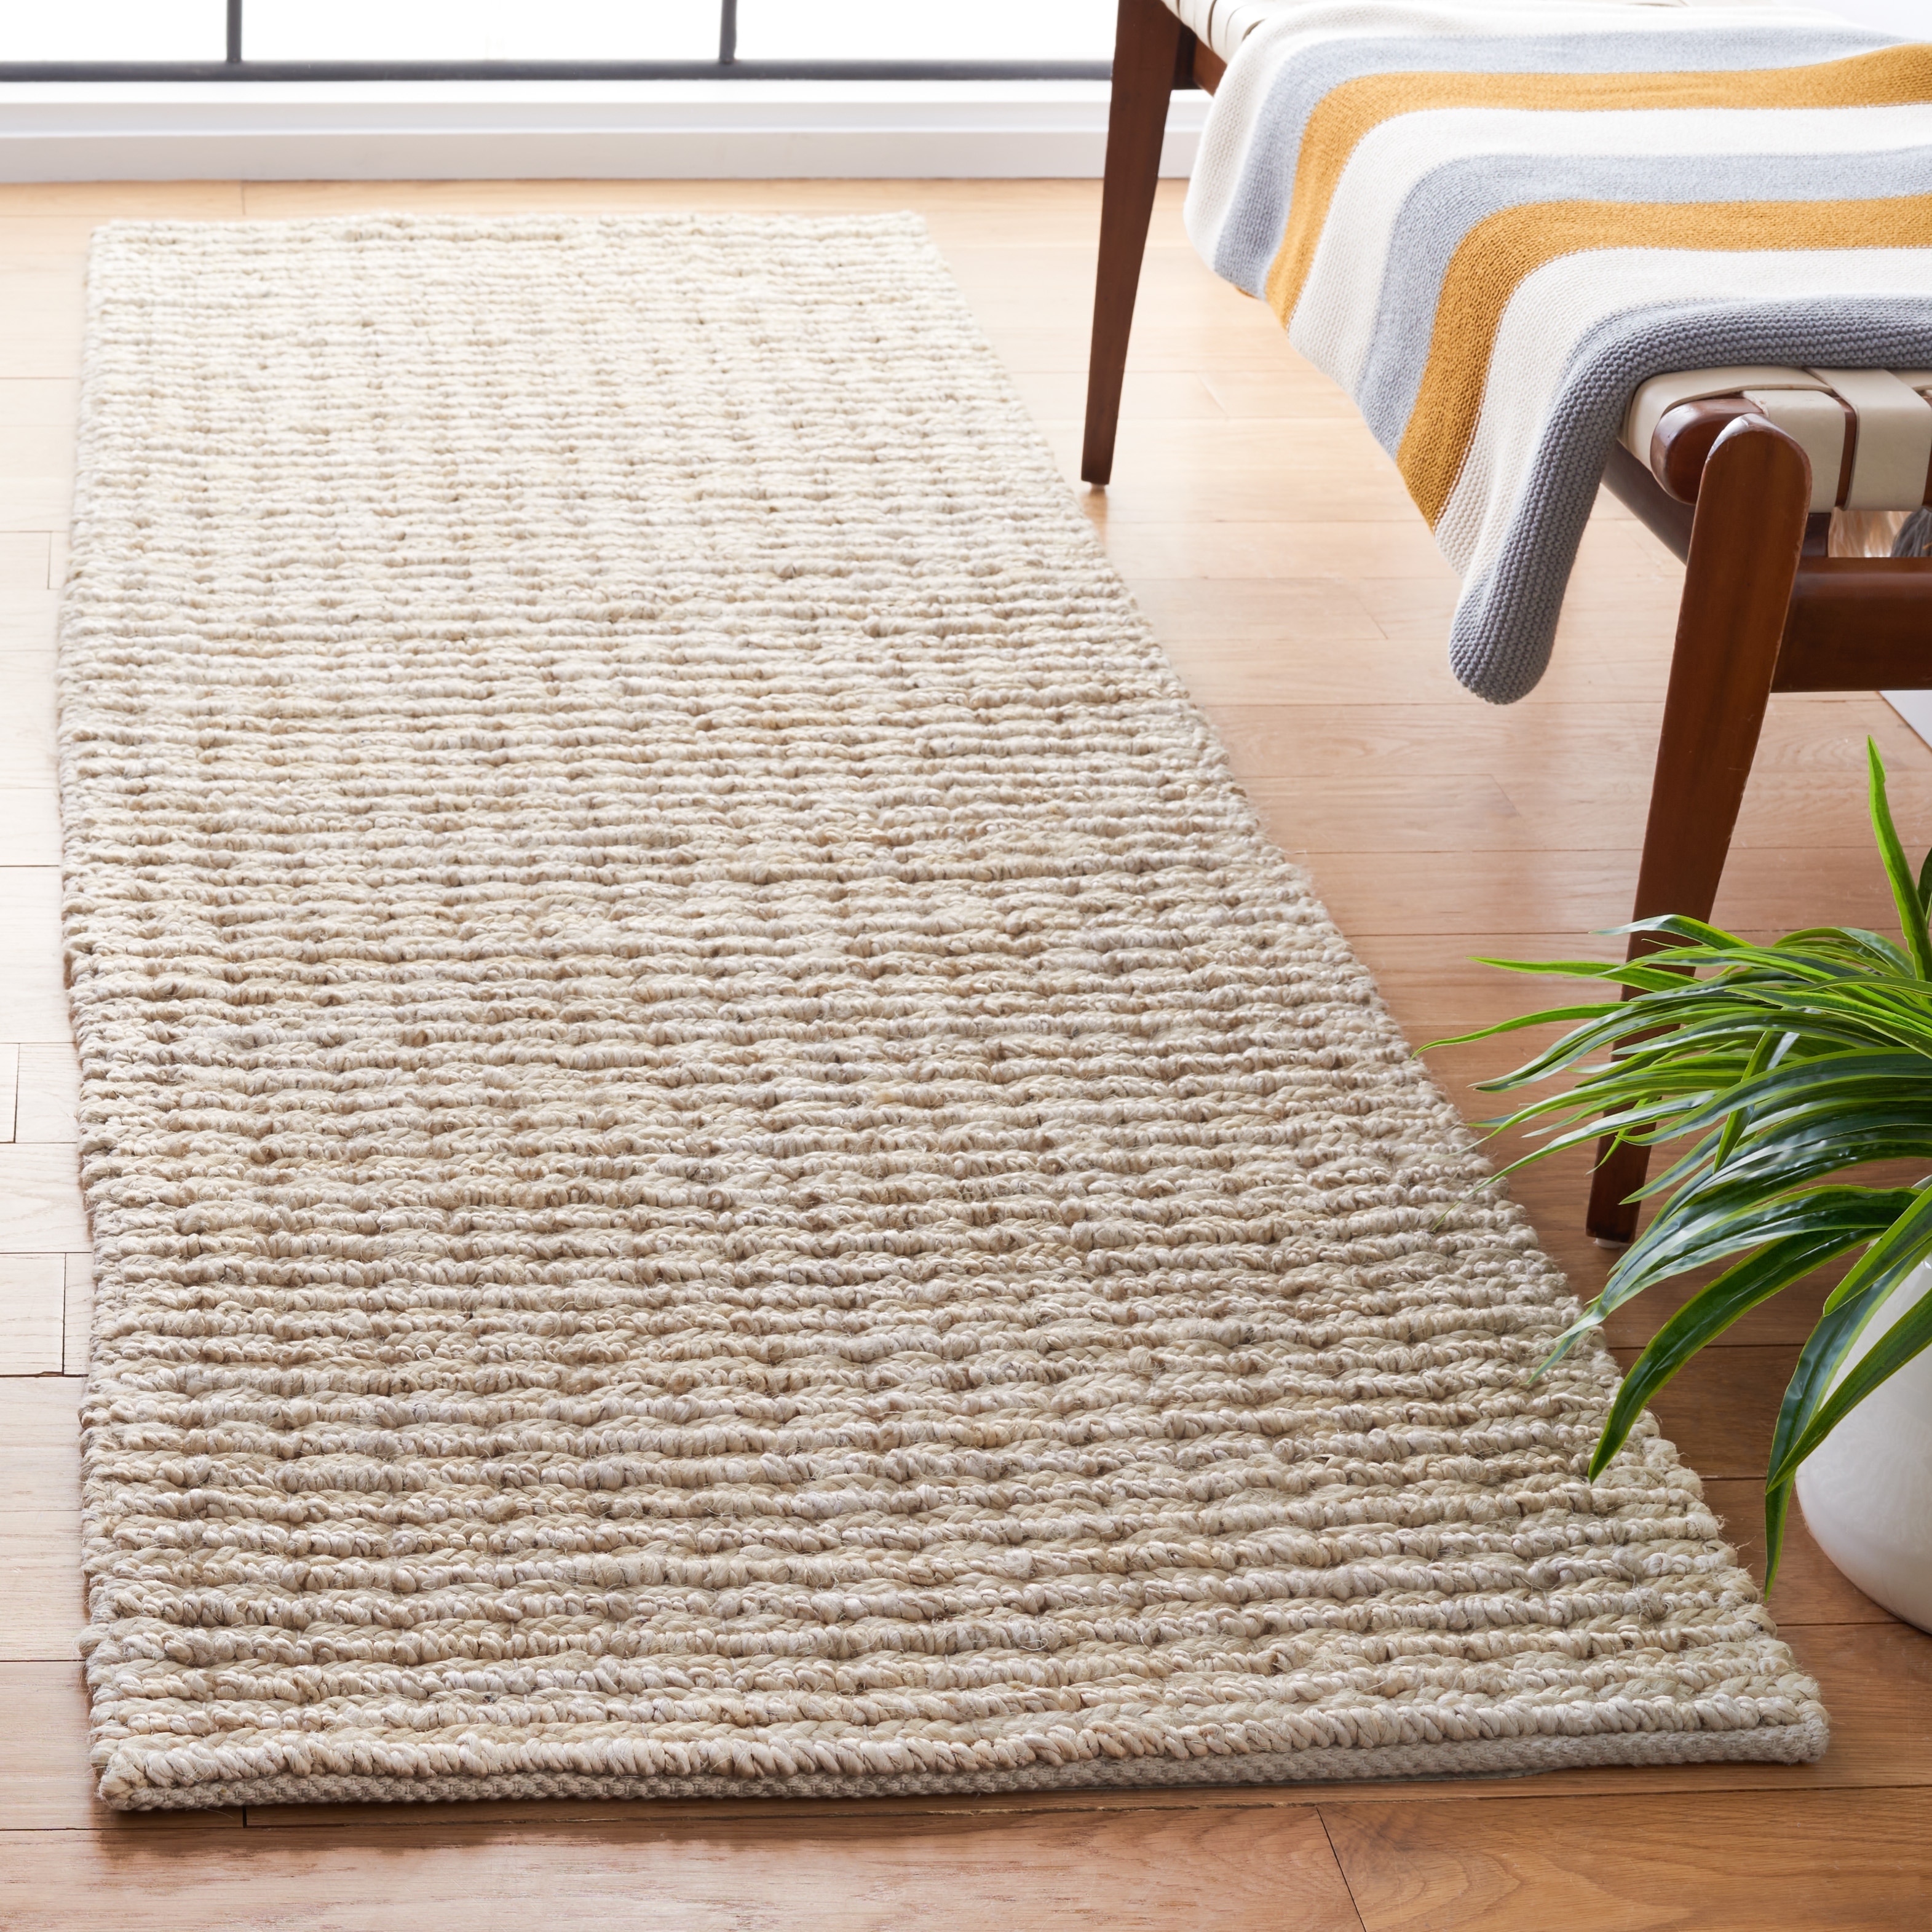 https://ak1.ostkcdn.com/images/products/is/images/direct/d0838dd79a9dadc8942d344b6c91fa5f78a8d52a/SAFAVIEH-Handmade-Ivory-Jute-Area-Rug.jpg